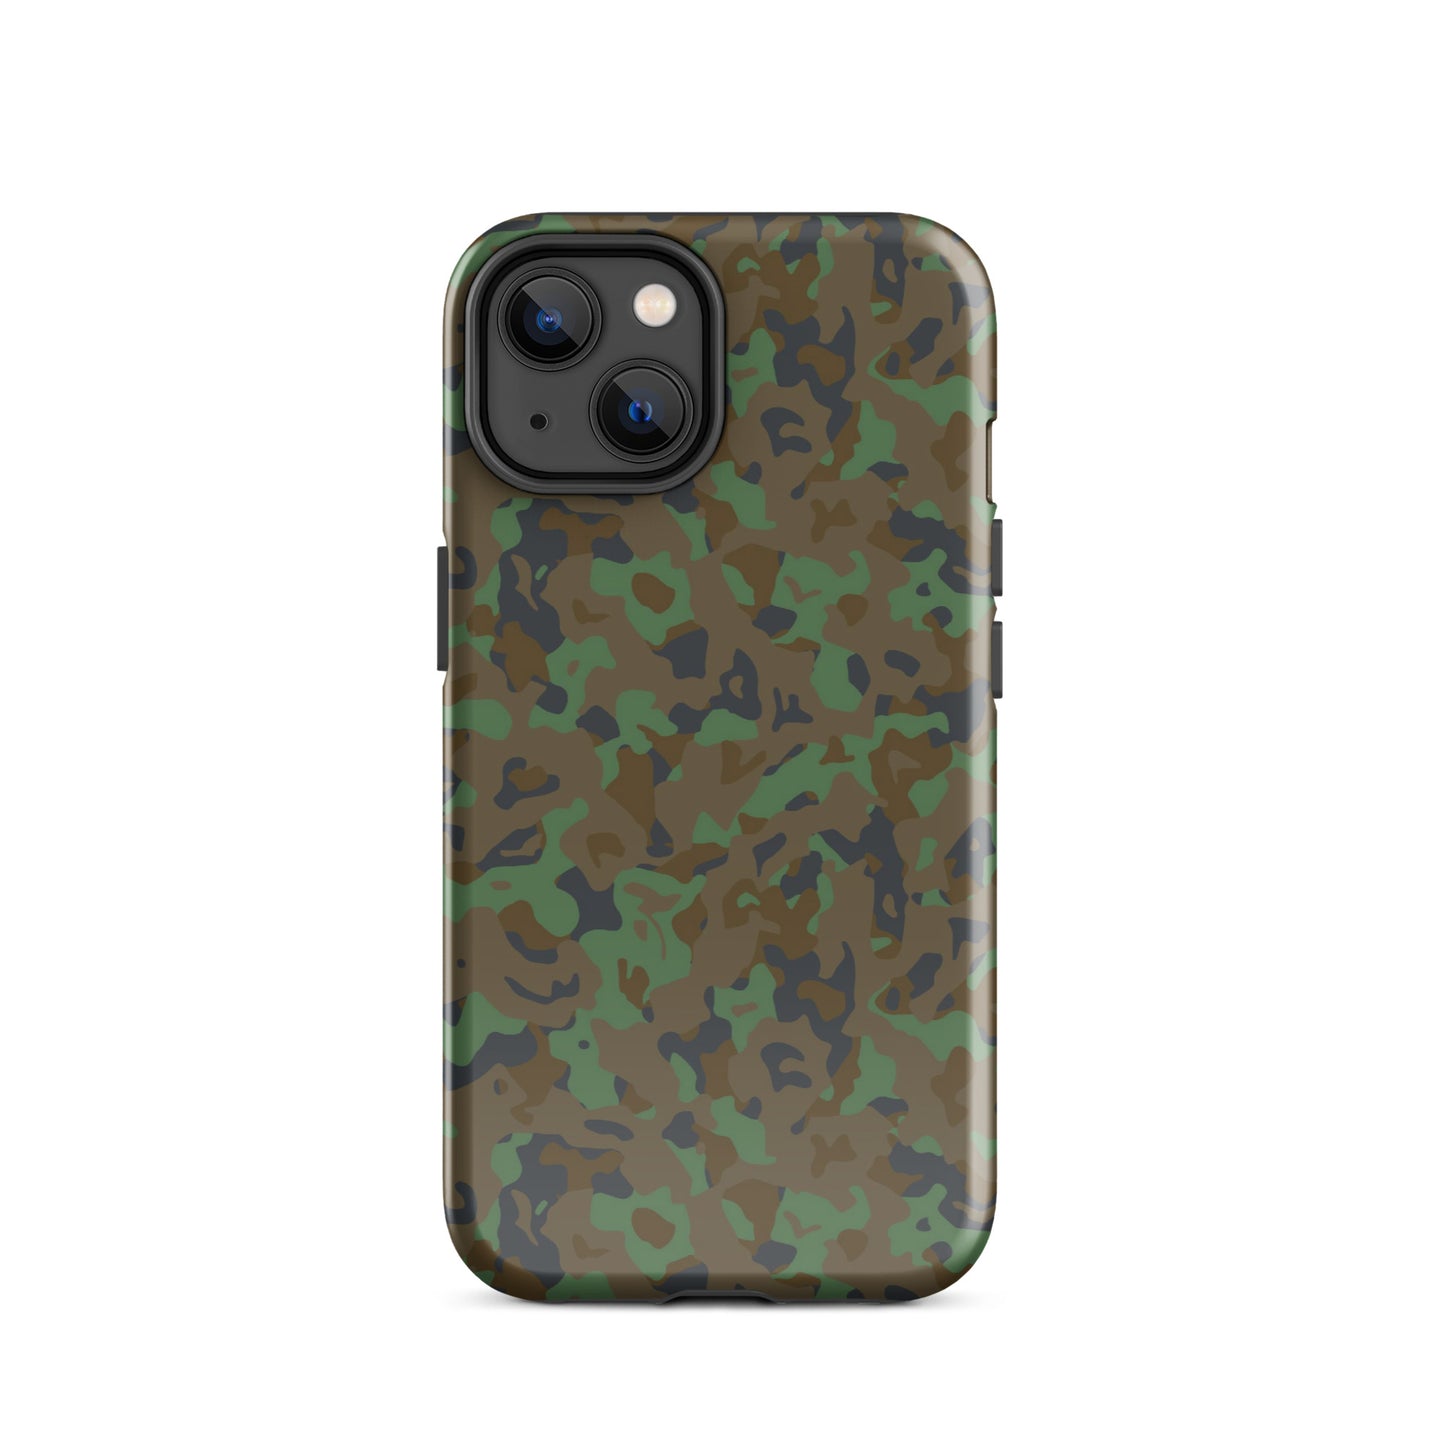 Armed Reload - iPhone Tough Case